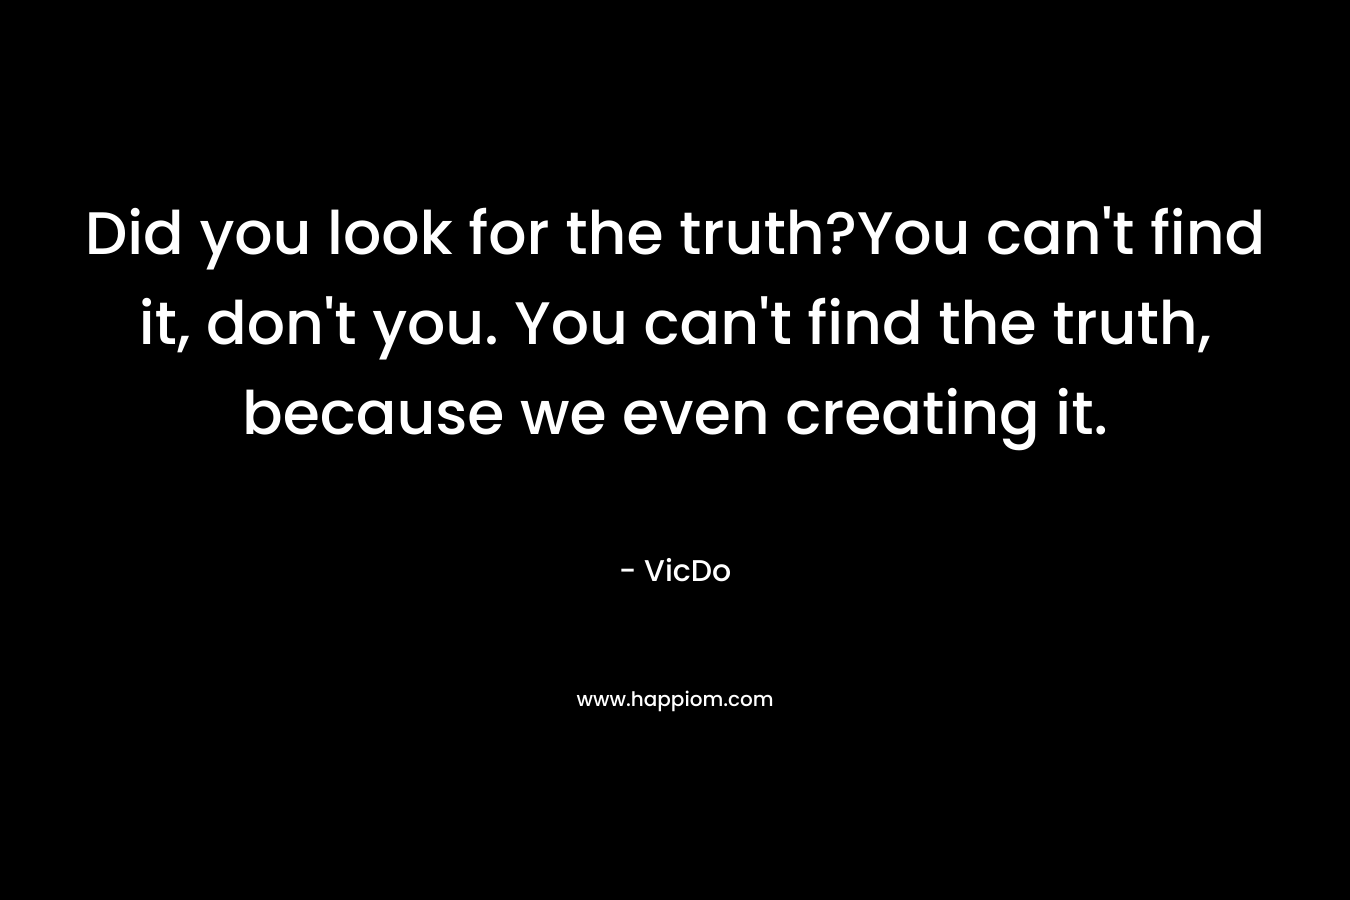 Did you look for the truth?You can’t find it, don’t you. You can’t find the truth, because we even creating it. – VicDo